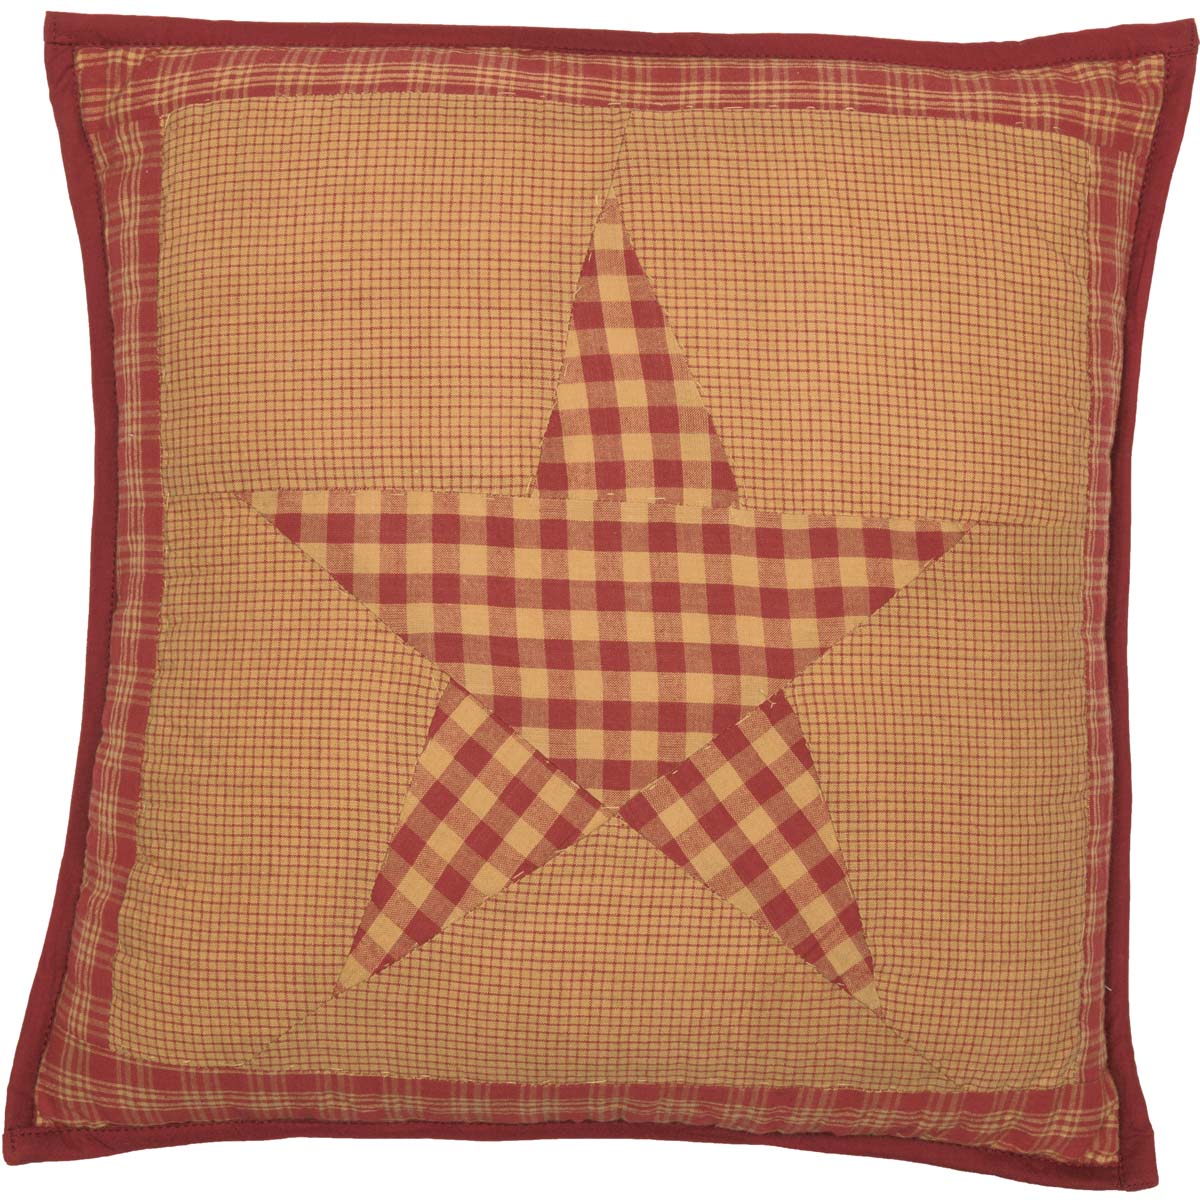 32170-Ninepatch-Star-Quilted-Pillow-16x16-image-4